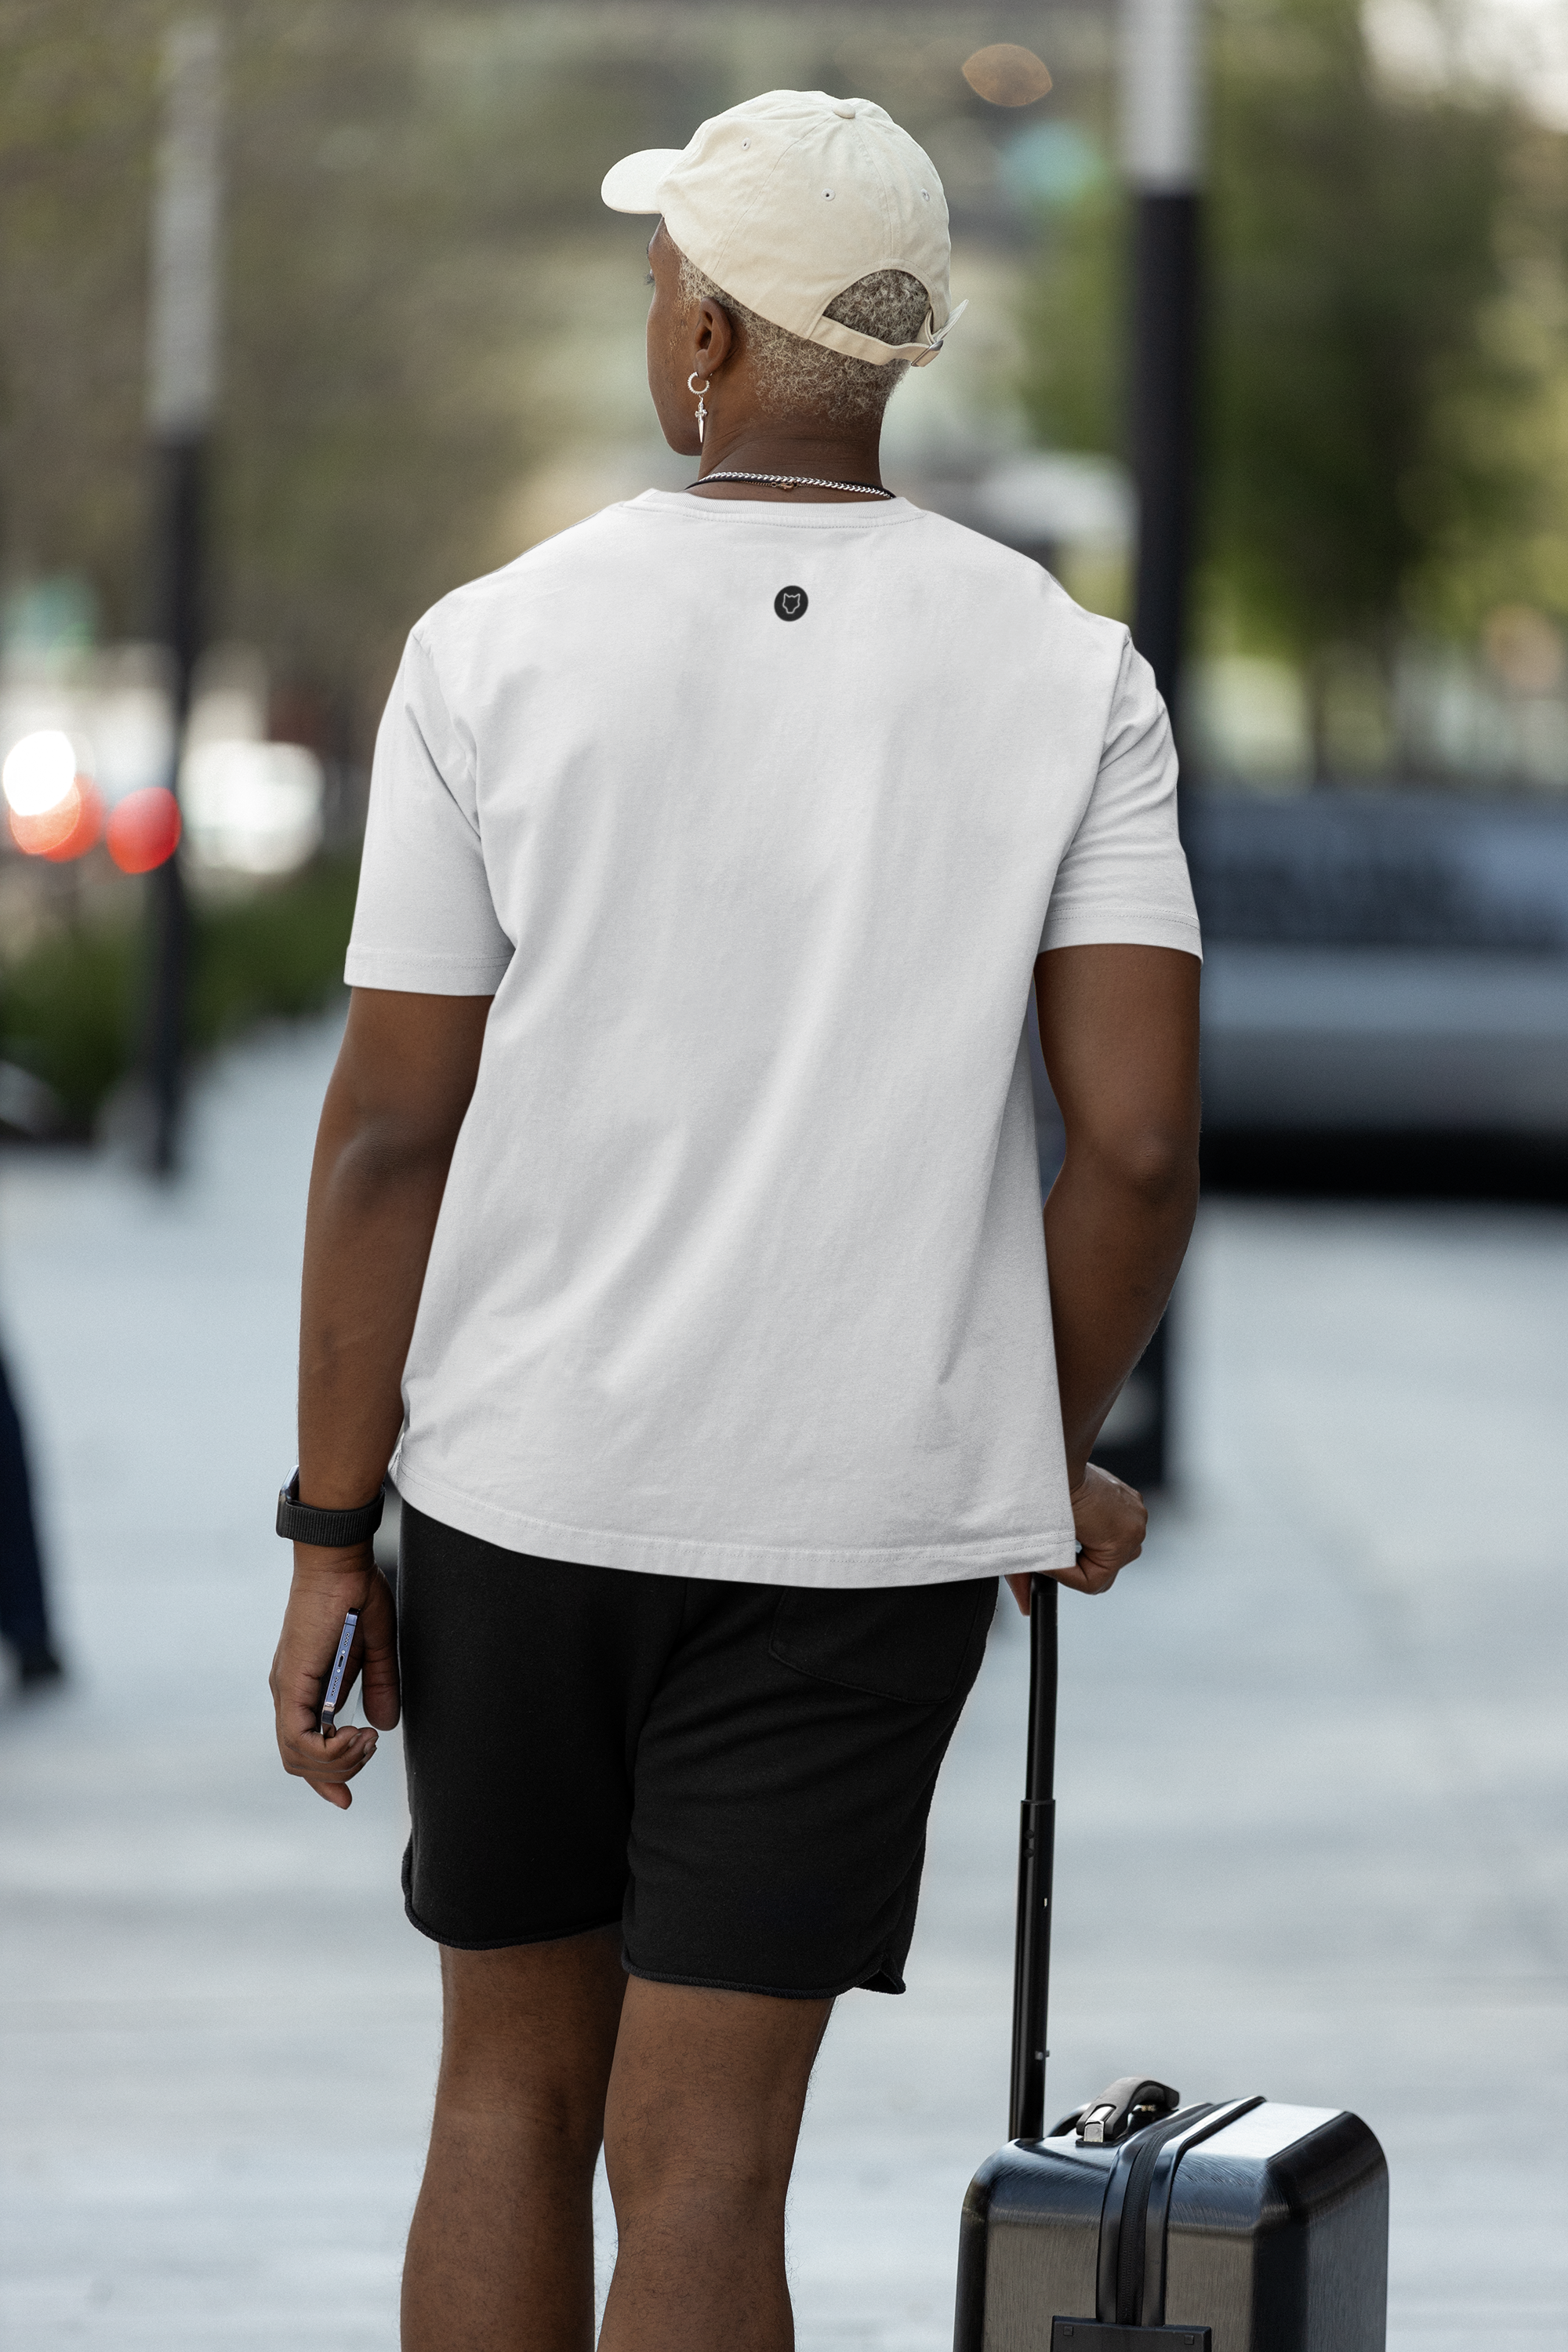 A Good looking man posing backwards wearing a white Casual T-Shirt with a suitcase in his hand. He is pairing the T-Shirt with a pair of black Shorts.